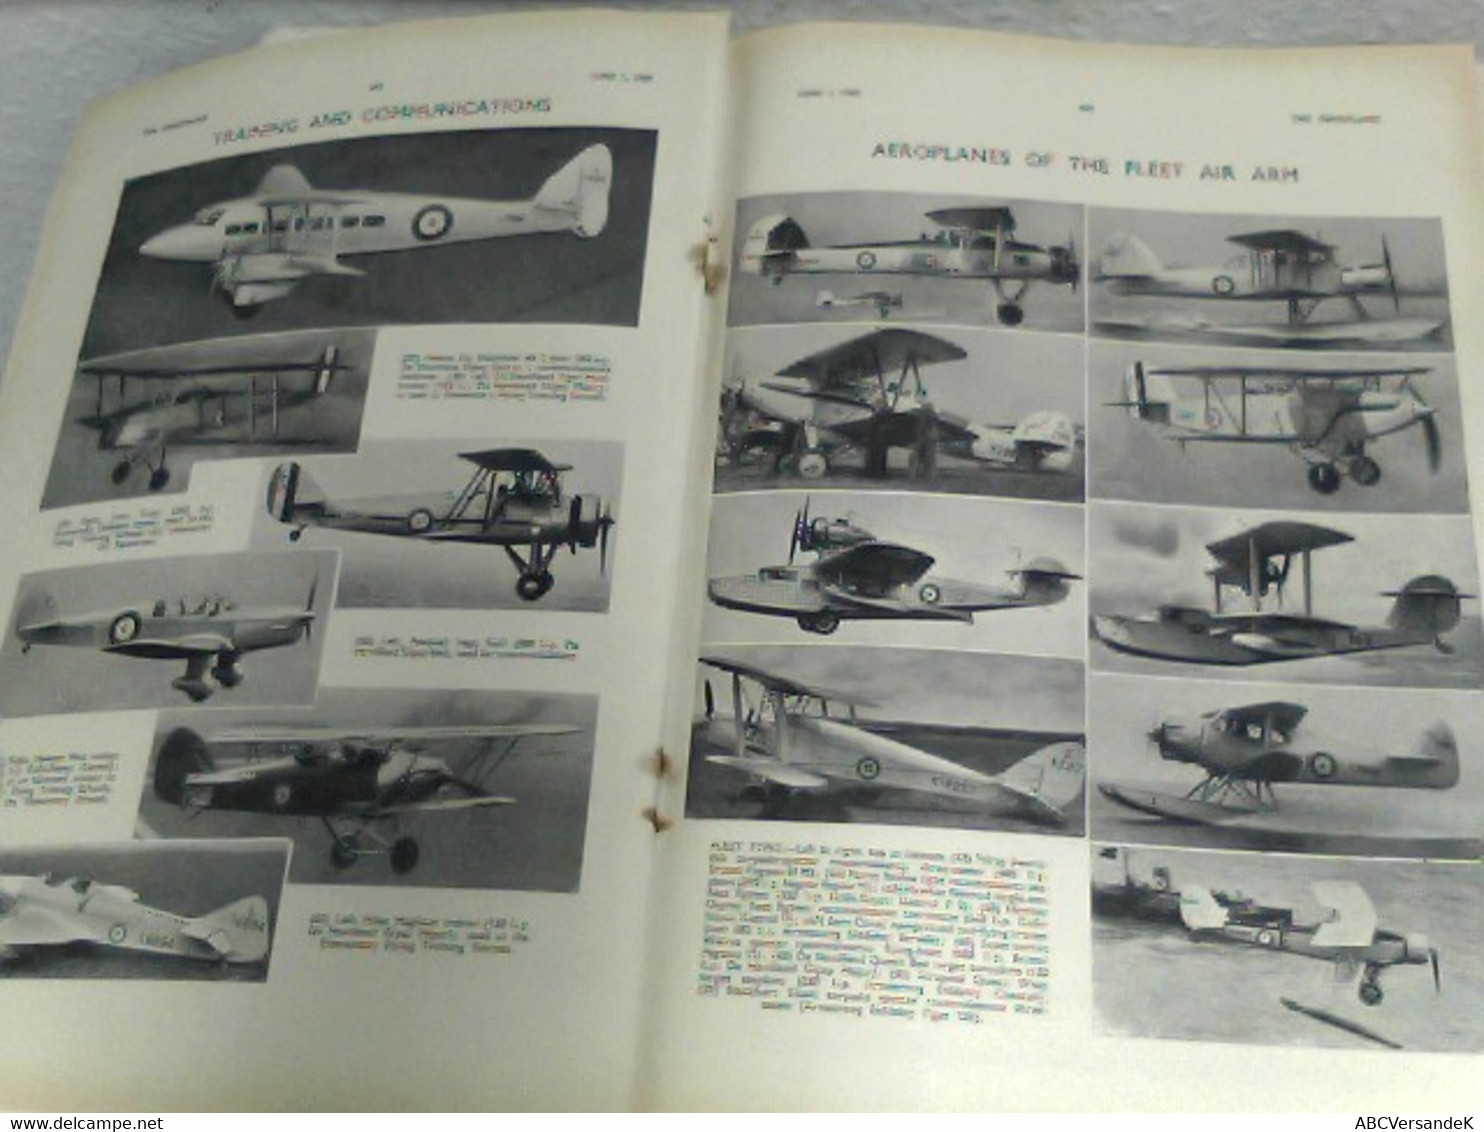 The Aeroplane - June 1, 1938, Vol. LIV, No. 1410 - Titanine Aircraft Finishes. The Latest Air Ministry Specifi - Transporte